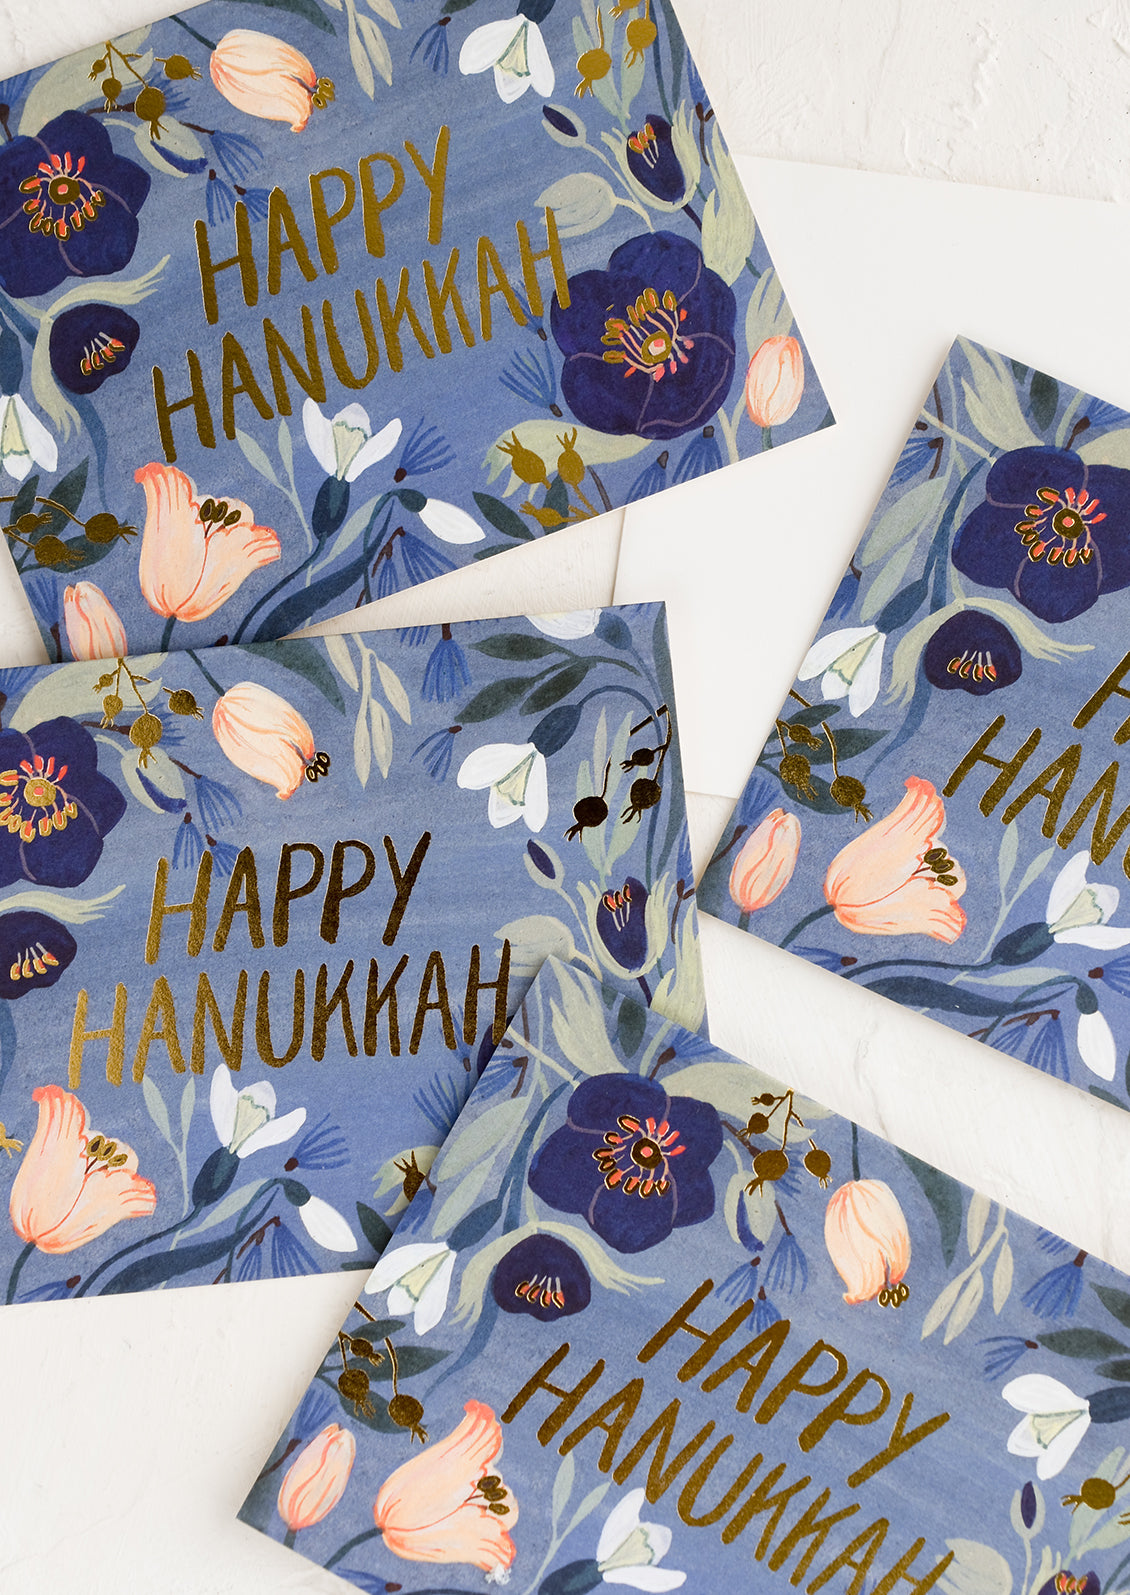 Greeting cards with blue floral print reading "happy hanukkah".